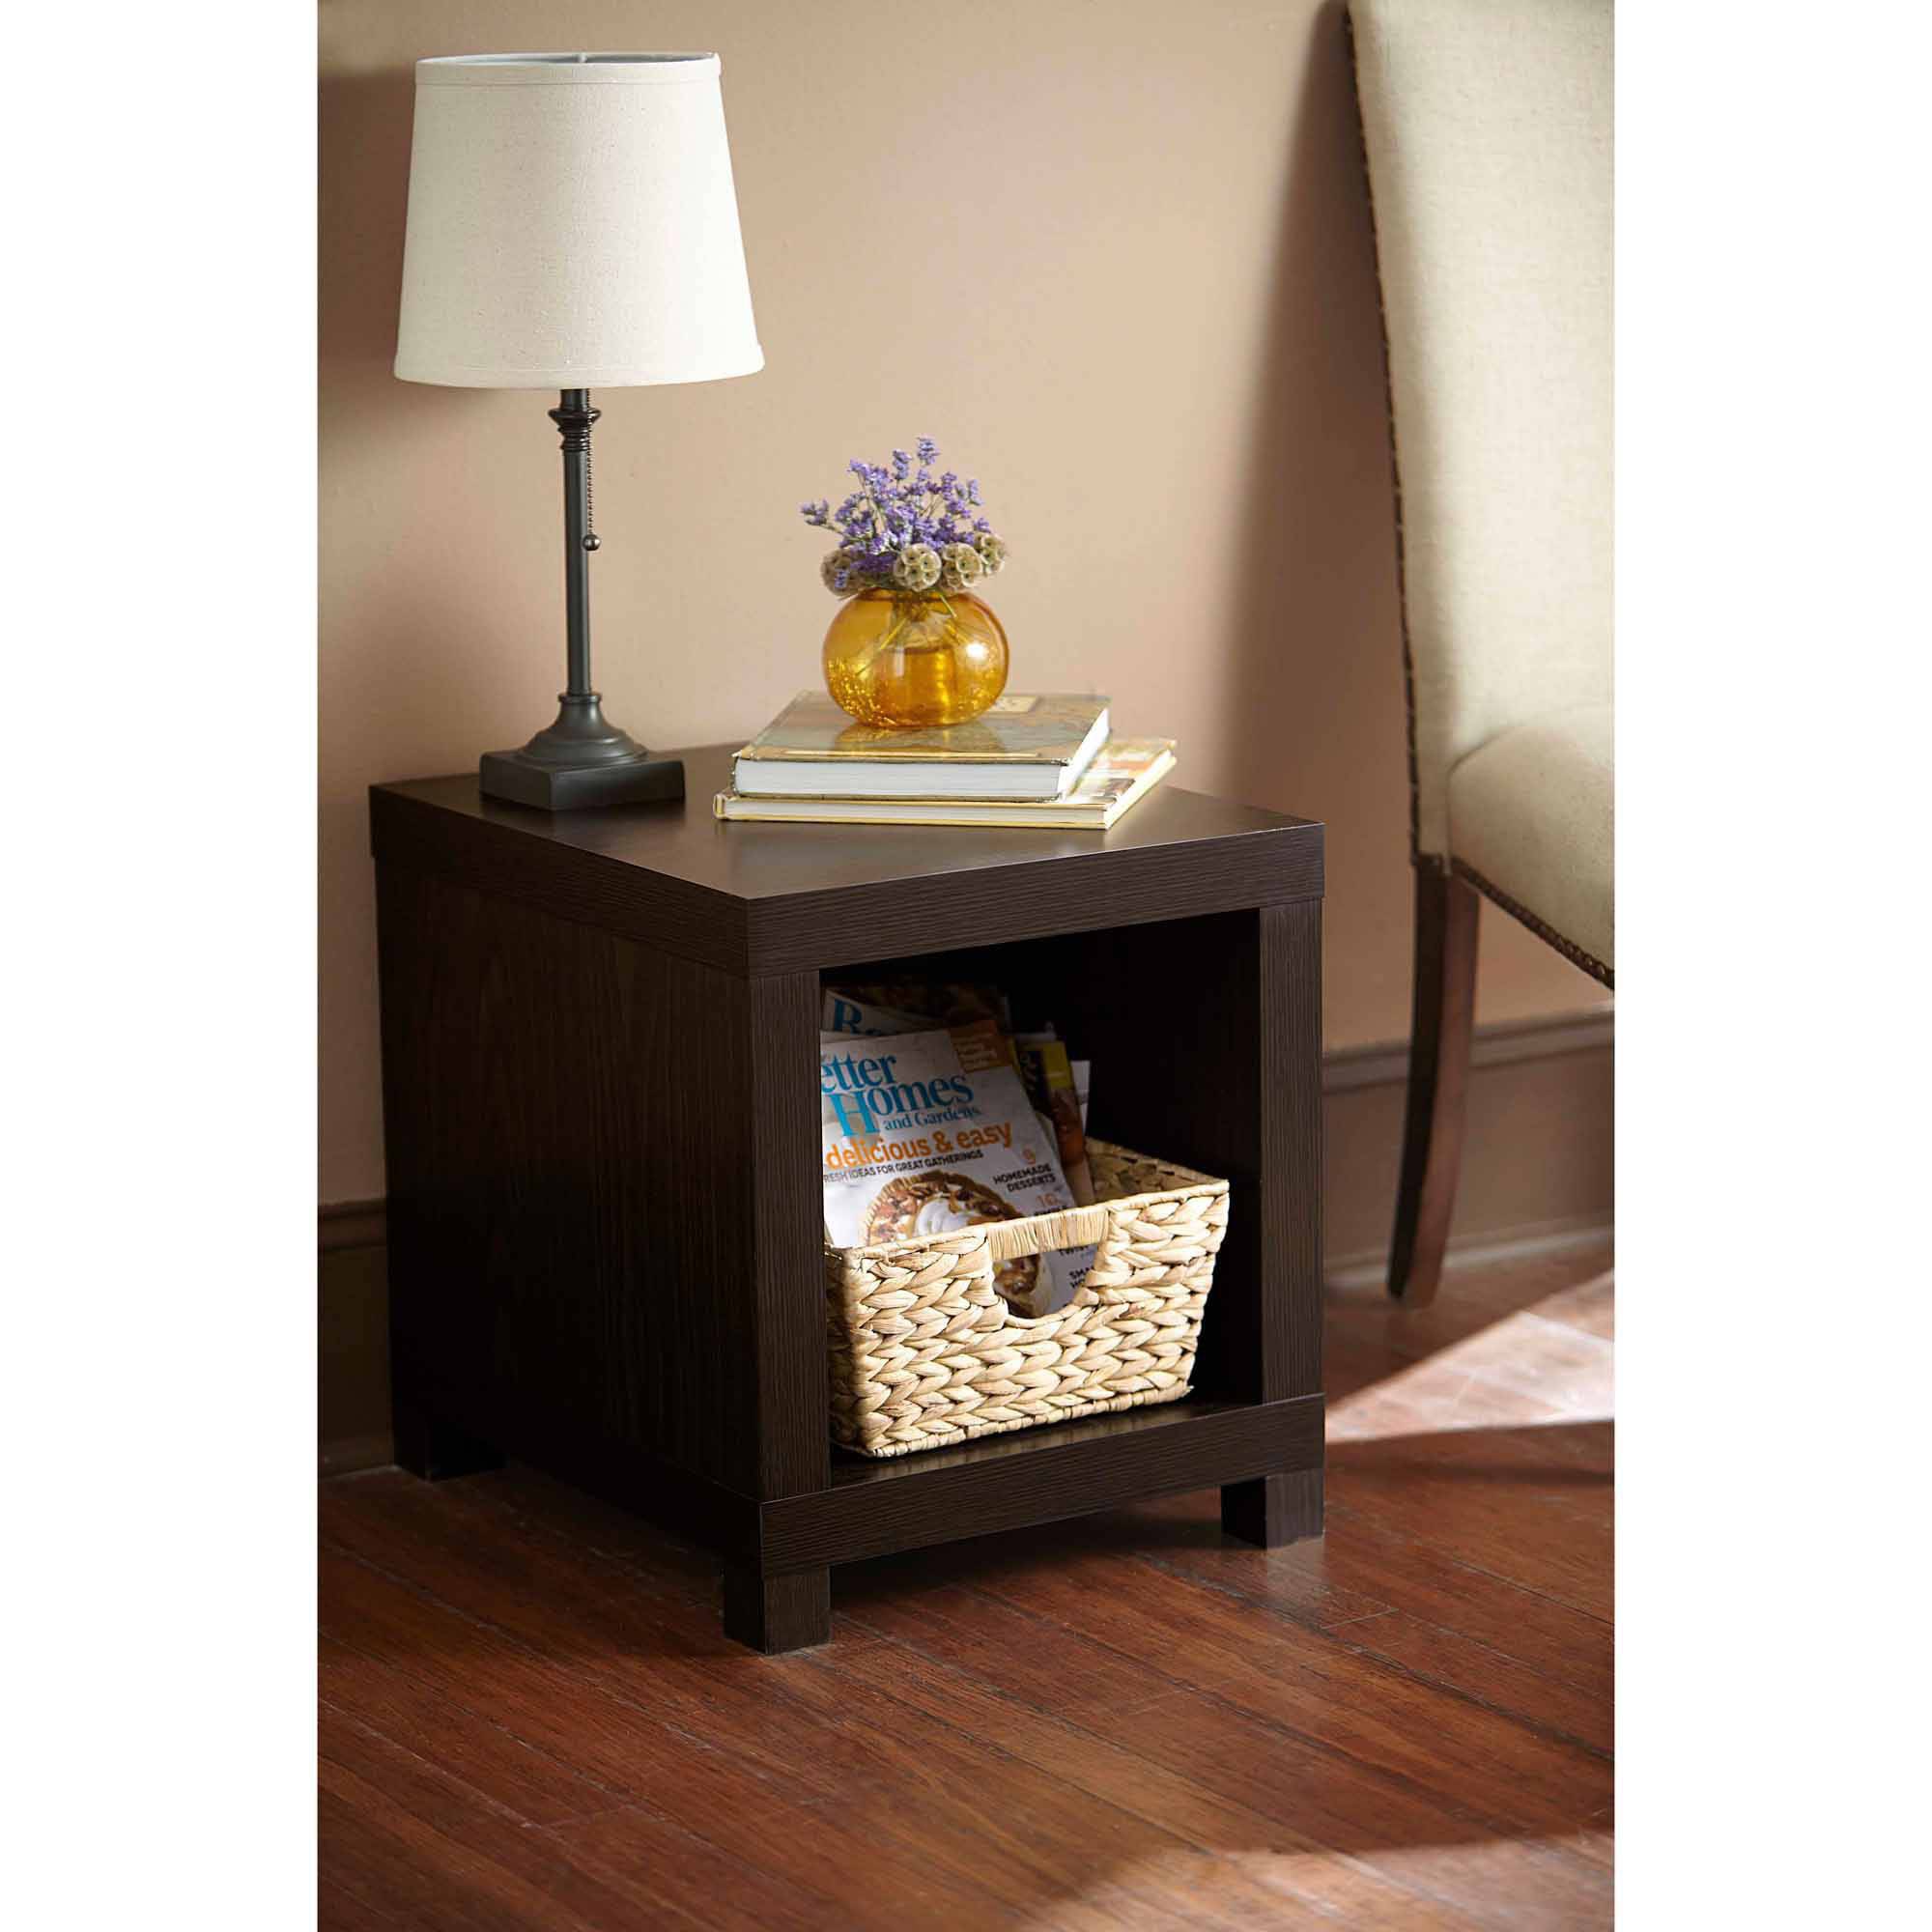 better homes gardens accent table multiple colors extra small tables designs wood tile reducer threshold hairpin legs acrylic white decorative storage cabinet ikea entrance